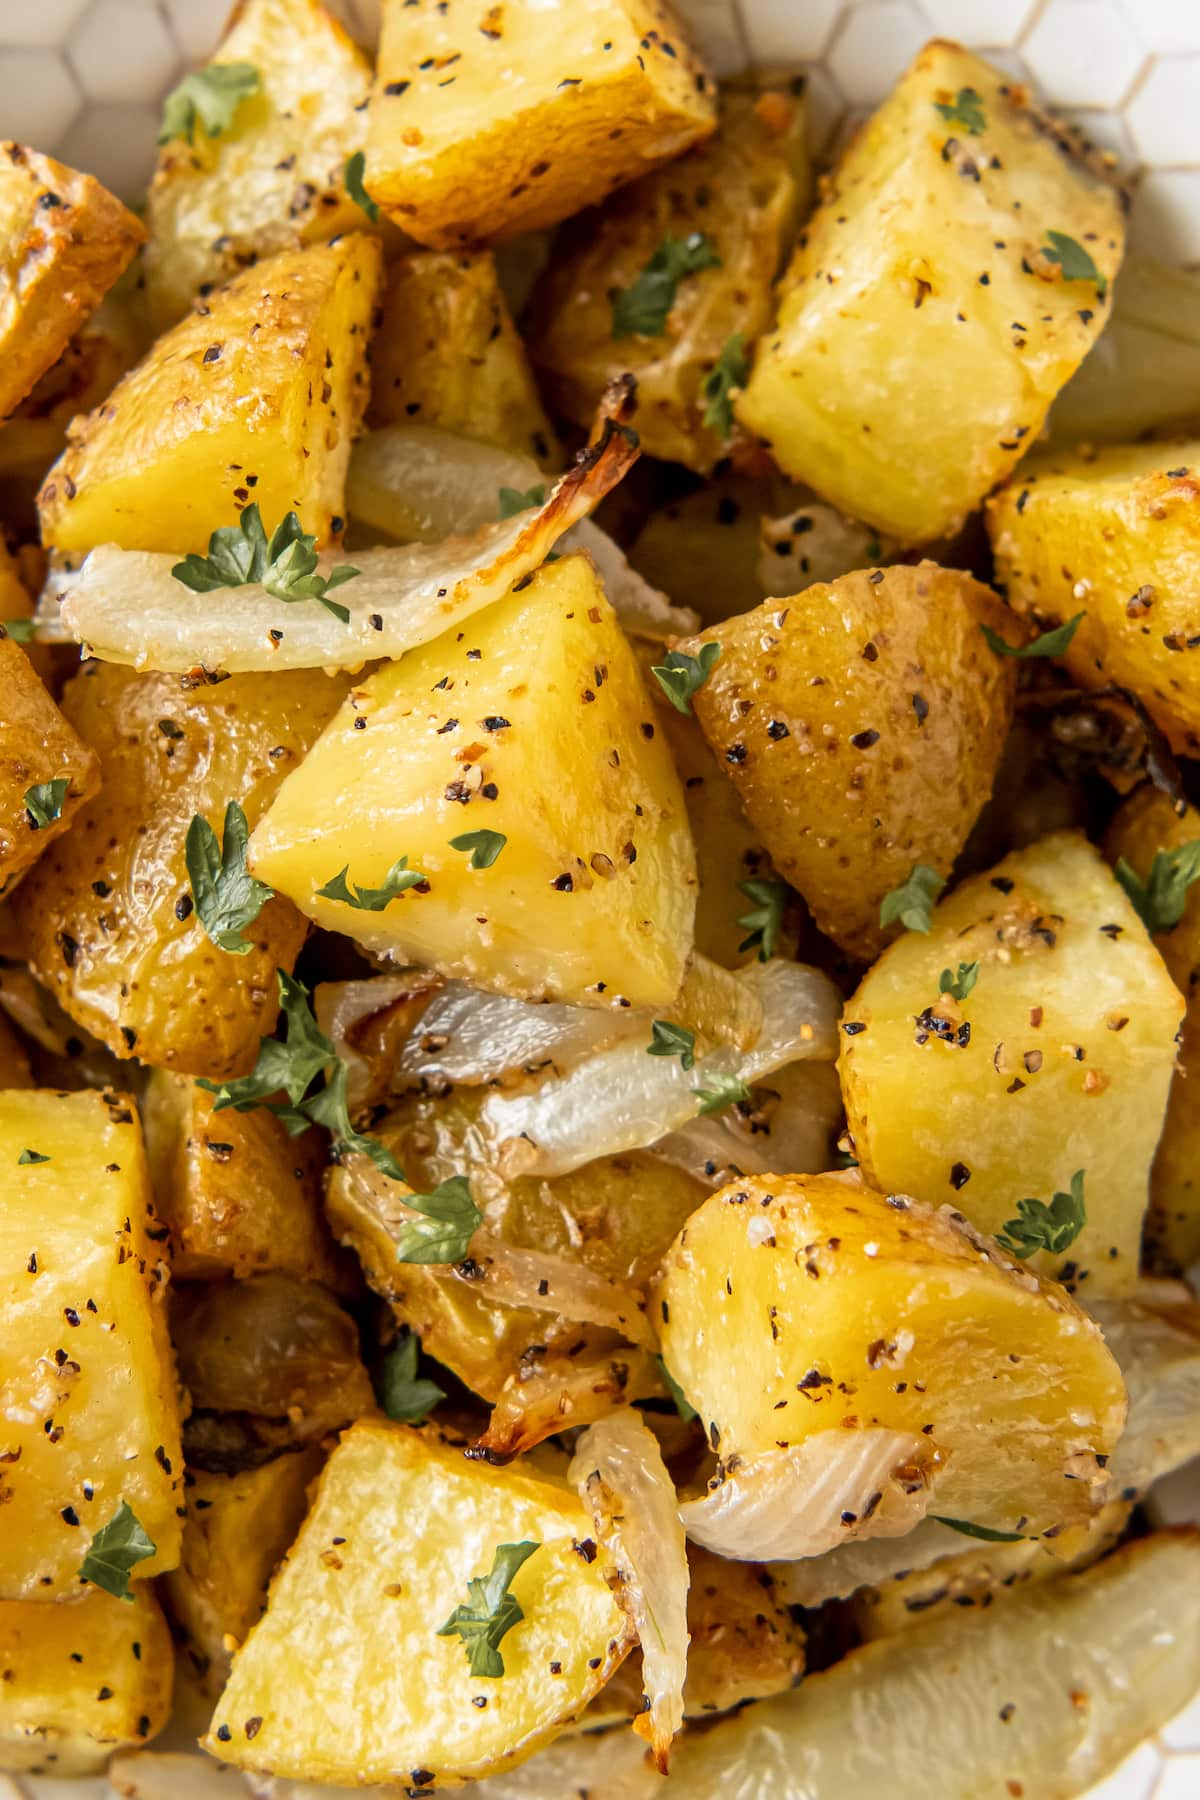 Fried potatoes and onions with herbs.